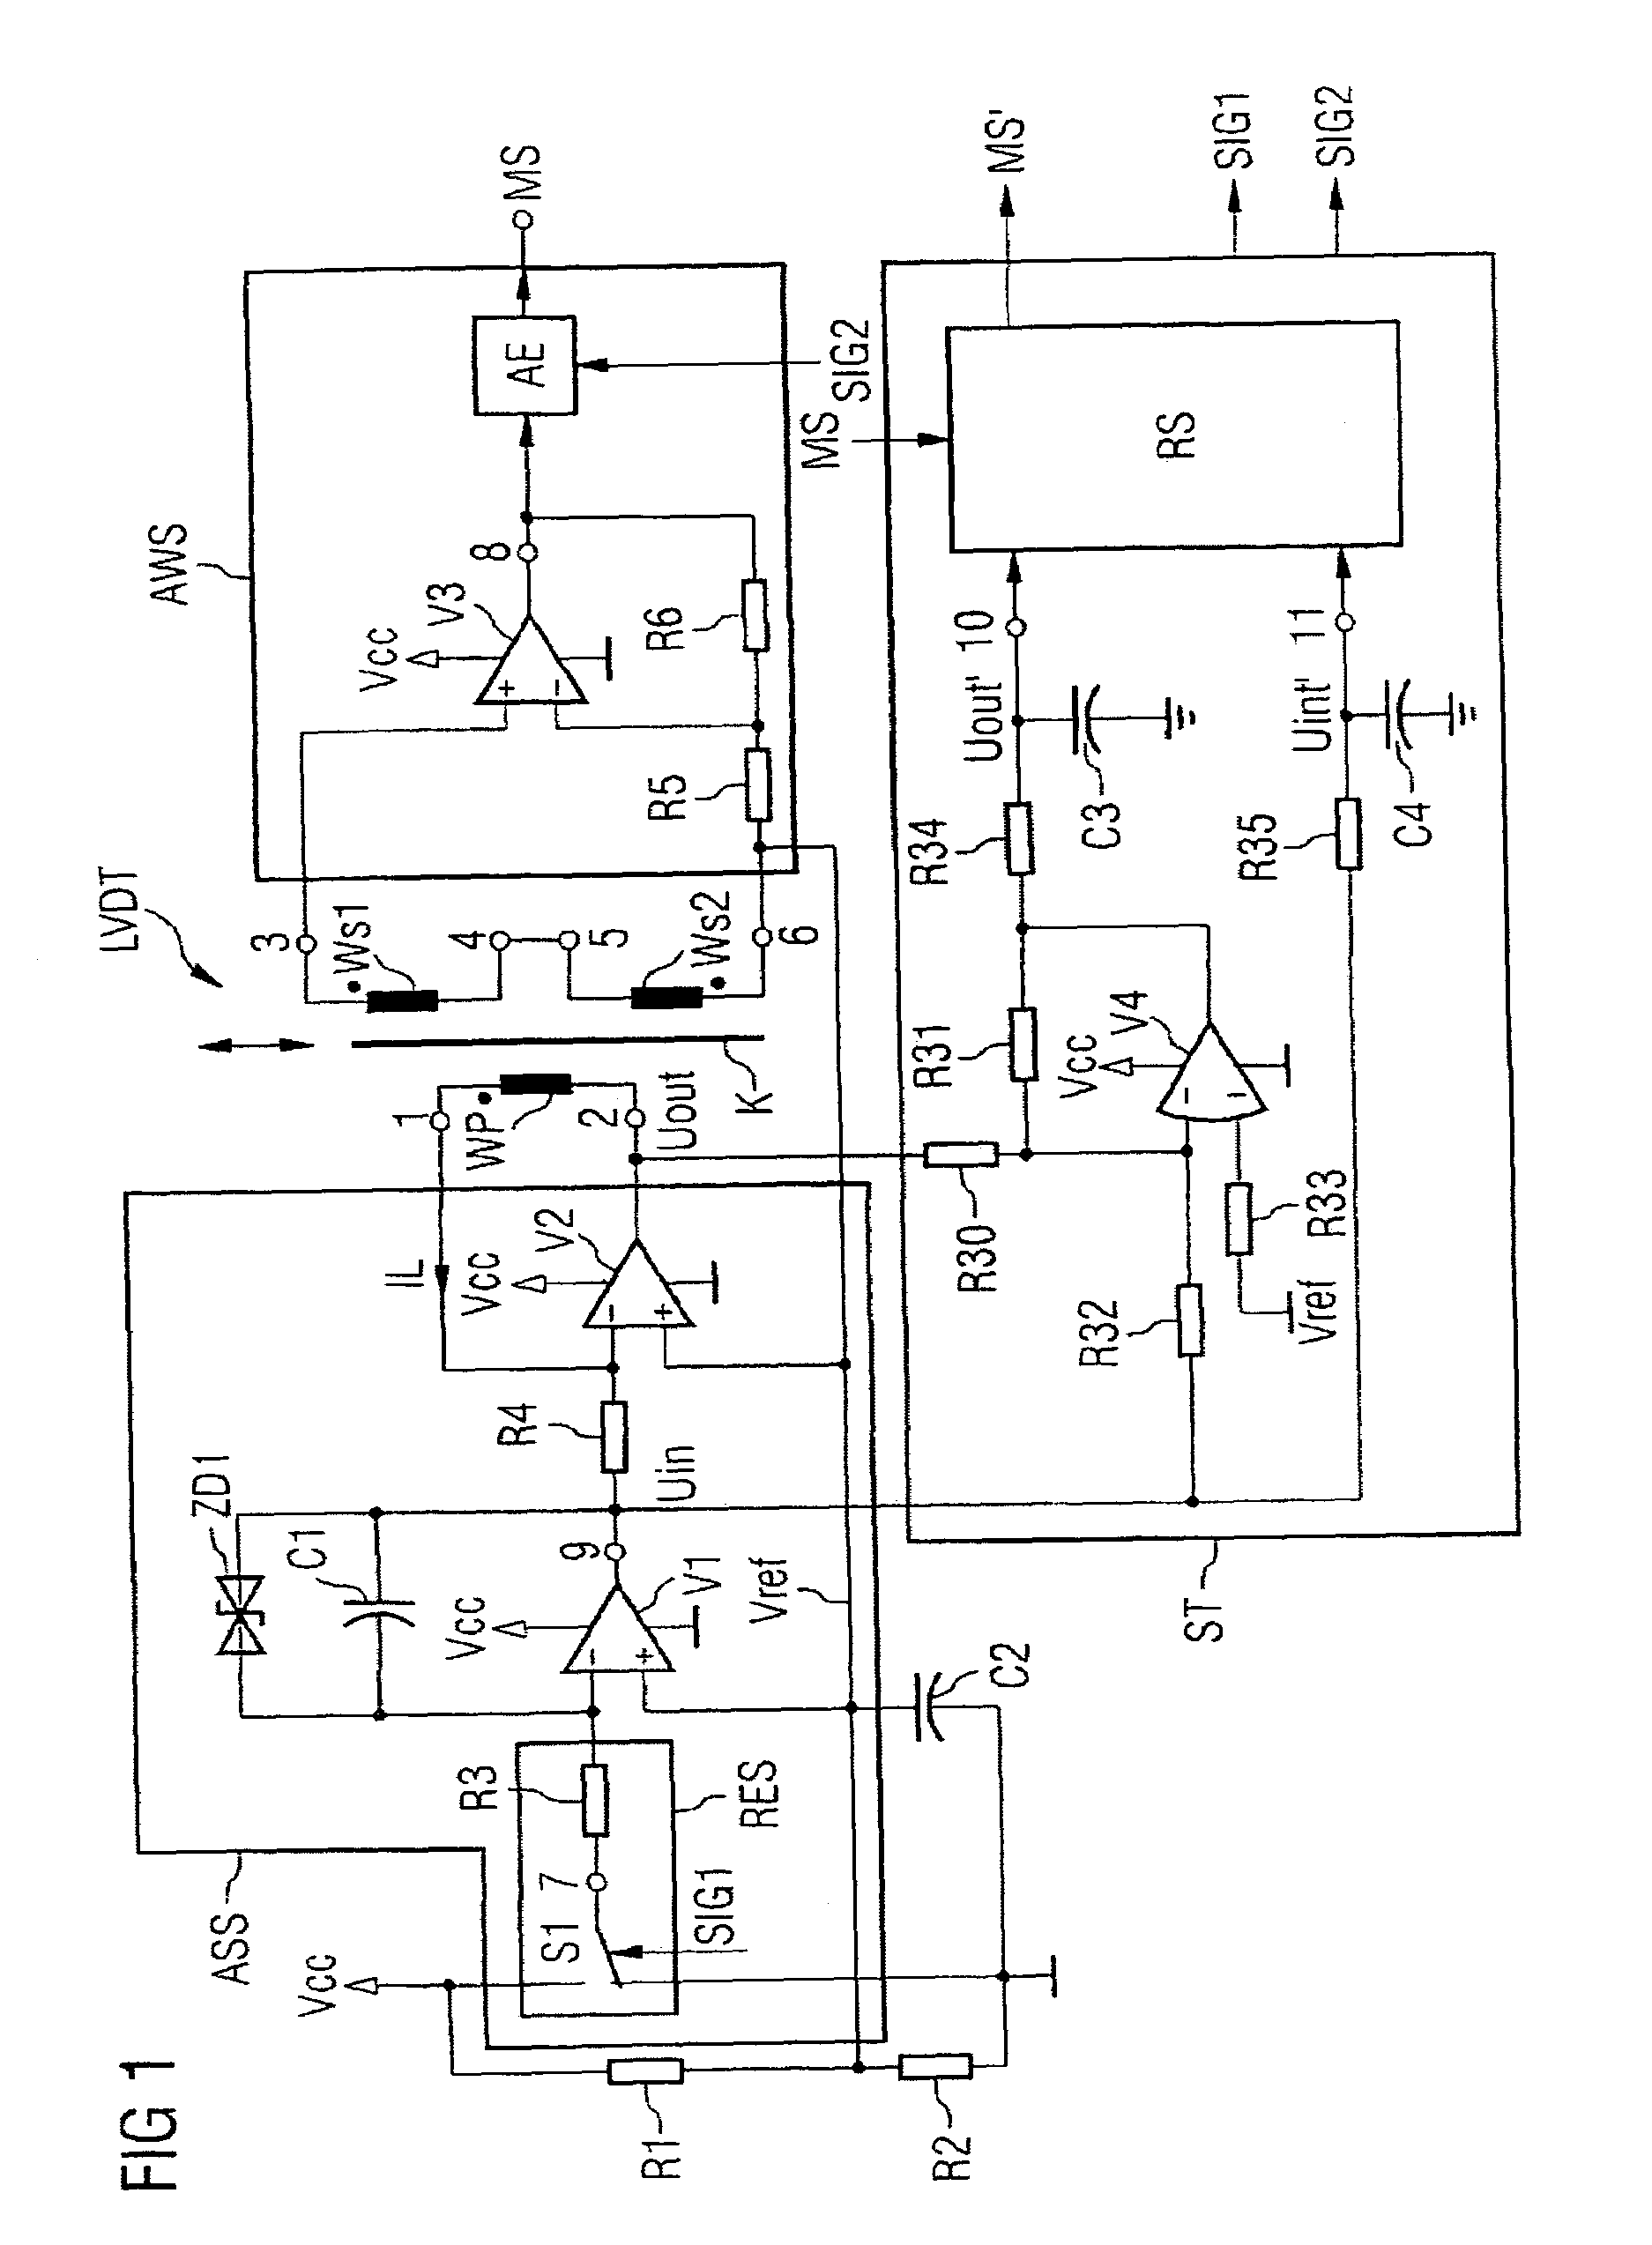 Circuit arrangement with a linear variable differential transformer (LVDT) as a displacement sensor or force sensor